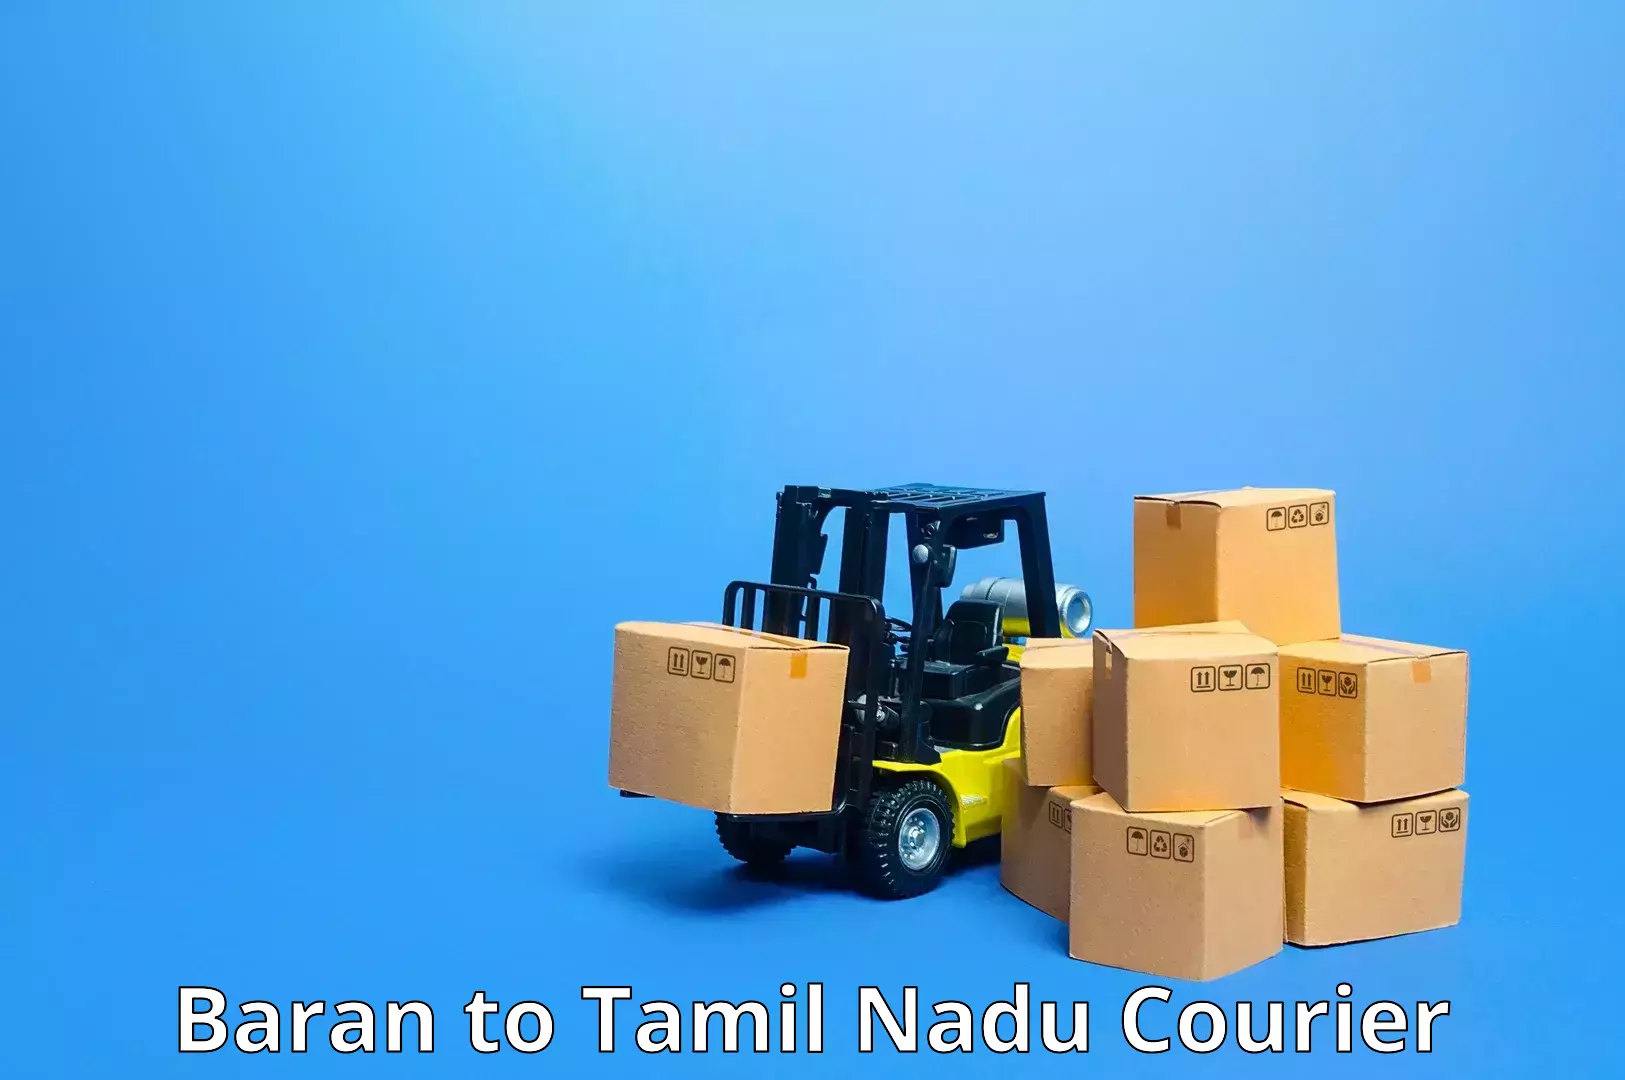 Package delivery network Baran to Palani